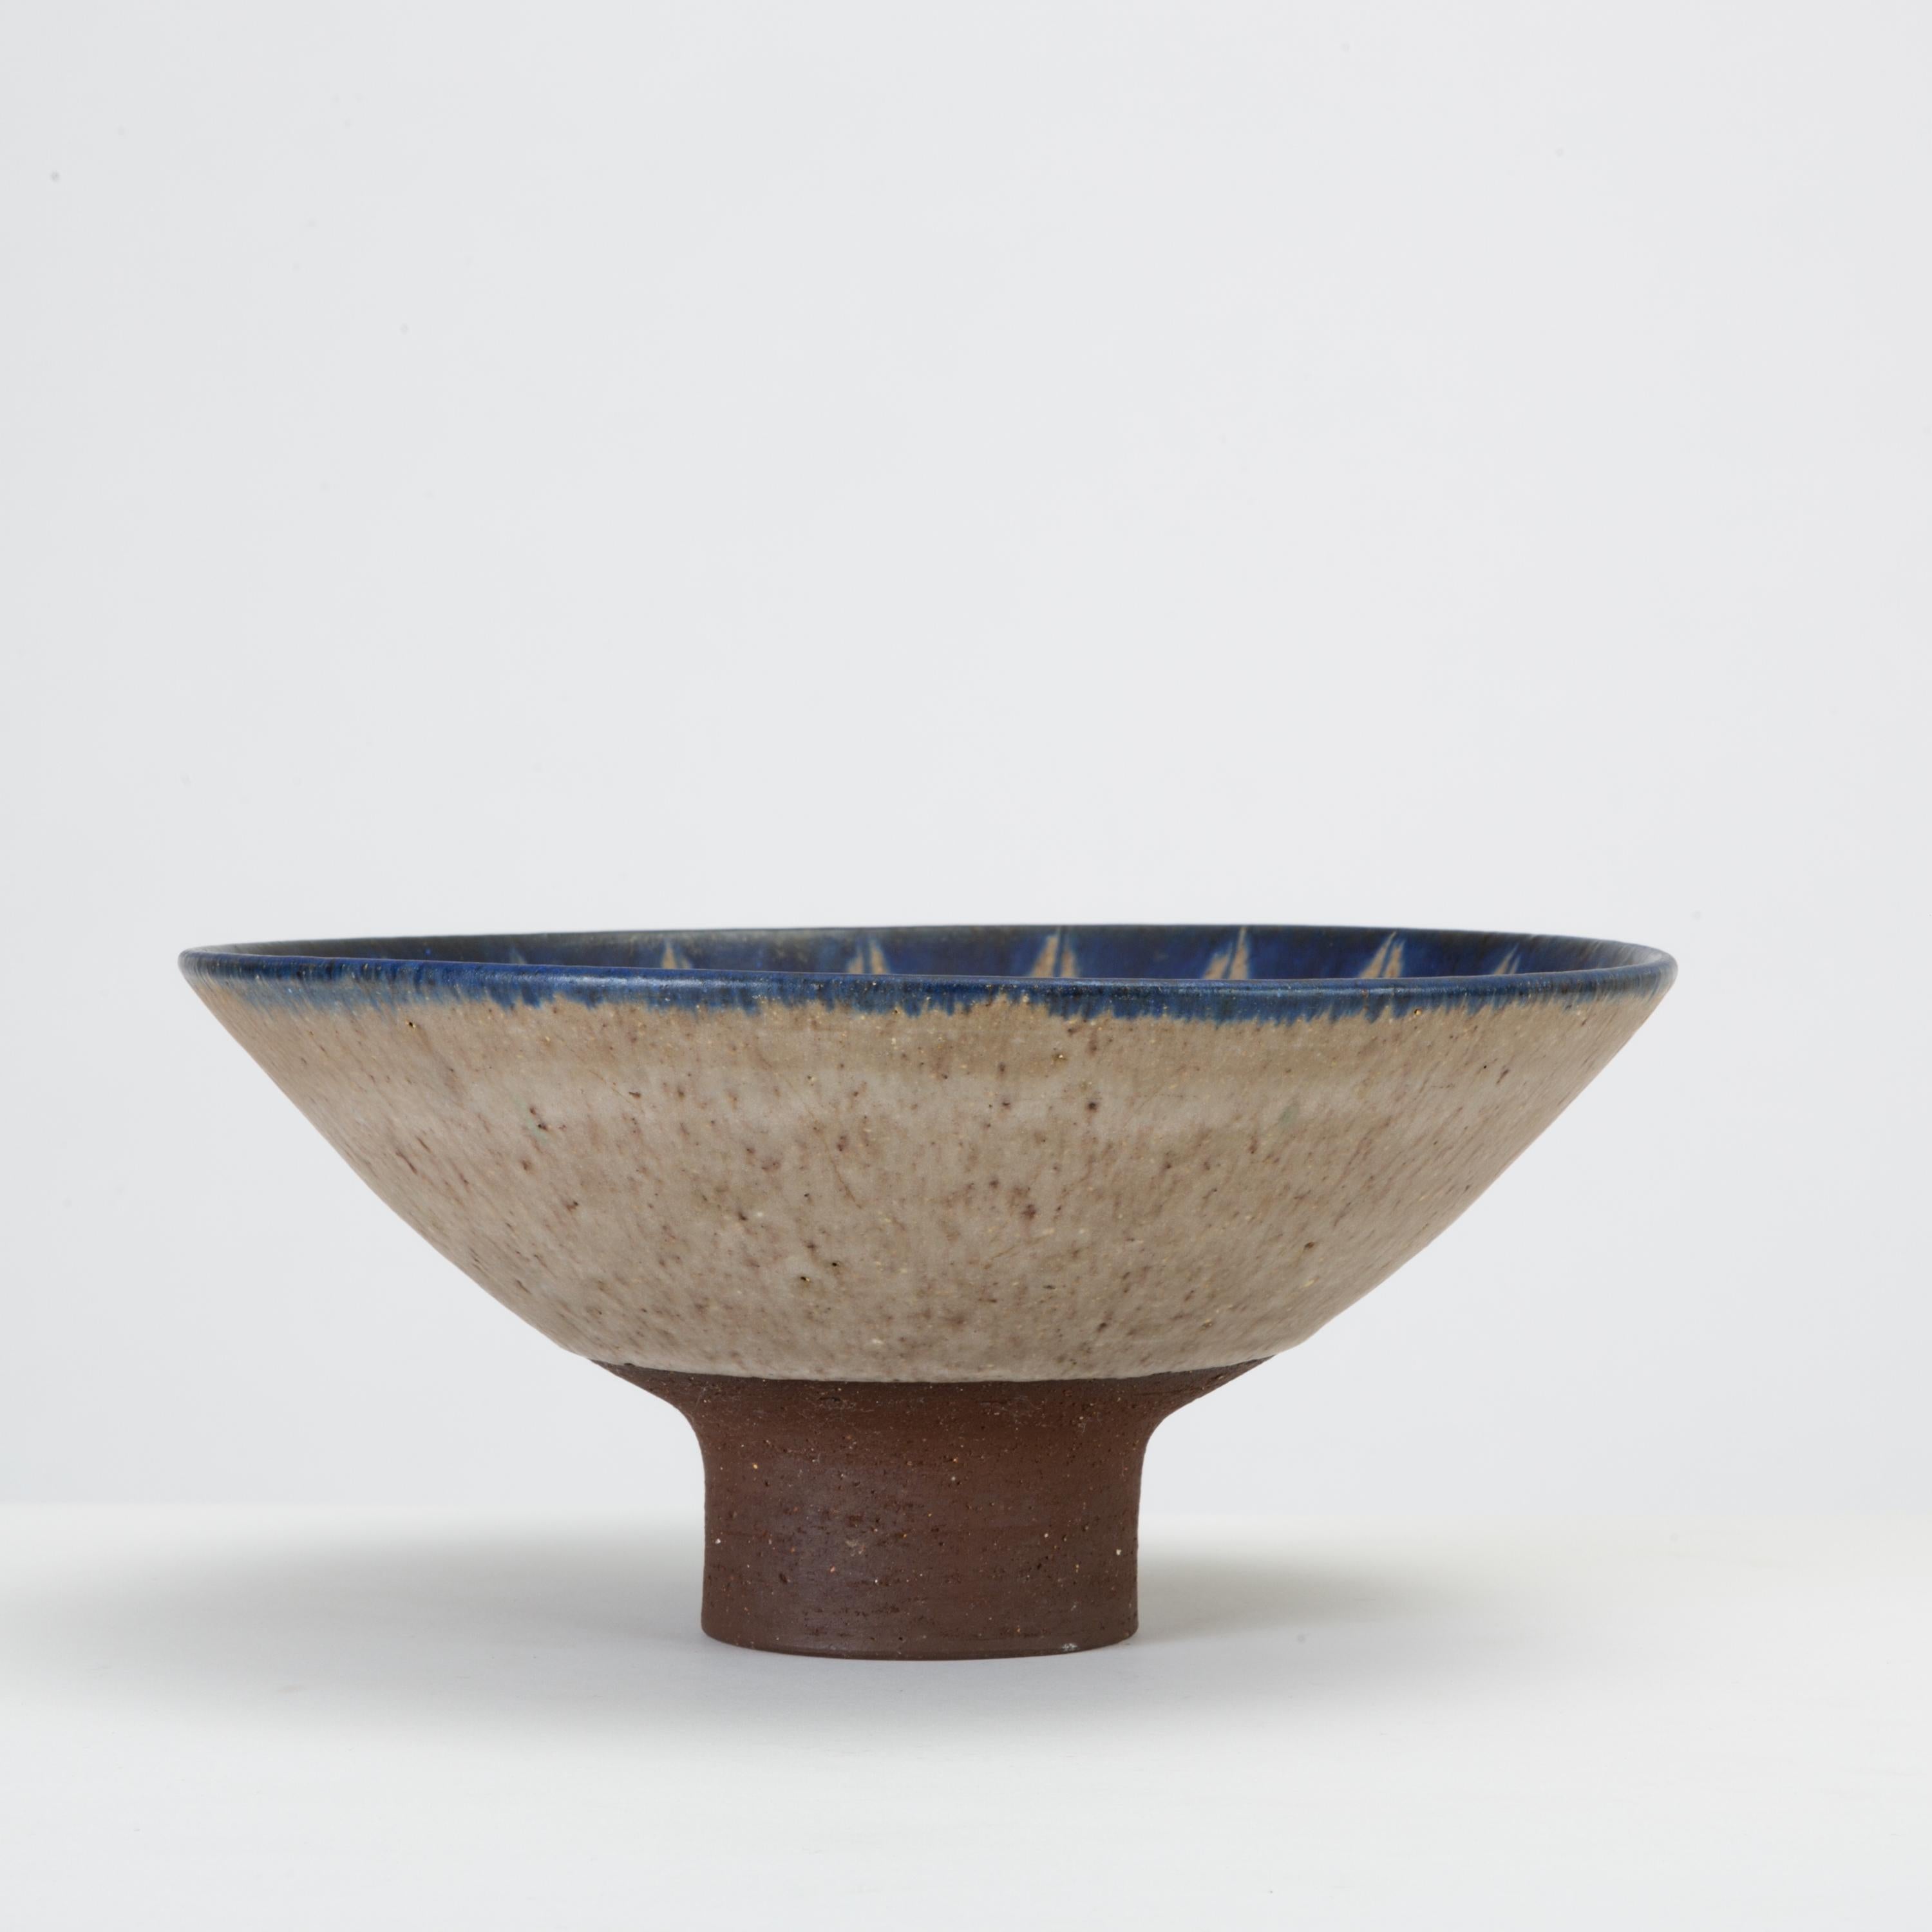 A small, footed stoneware bowl by Danish ceramicist Thomas Toft. The bowl is glazed in a tradition blue and white palate, with a leaf- or flame-like pattern decorating the interior. The dimensional glaze terminates slightly above the foot, leaving